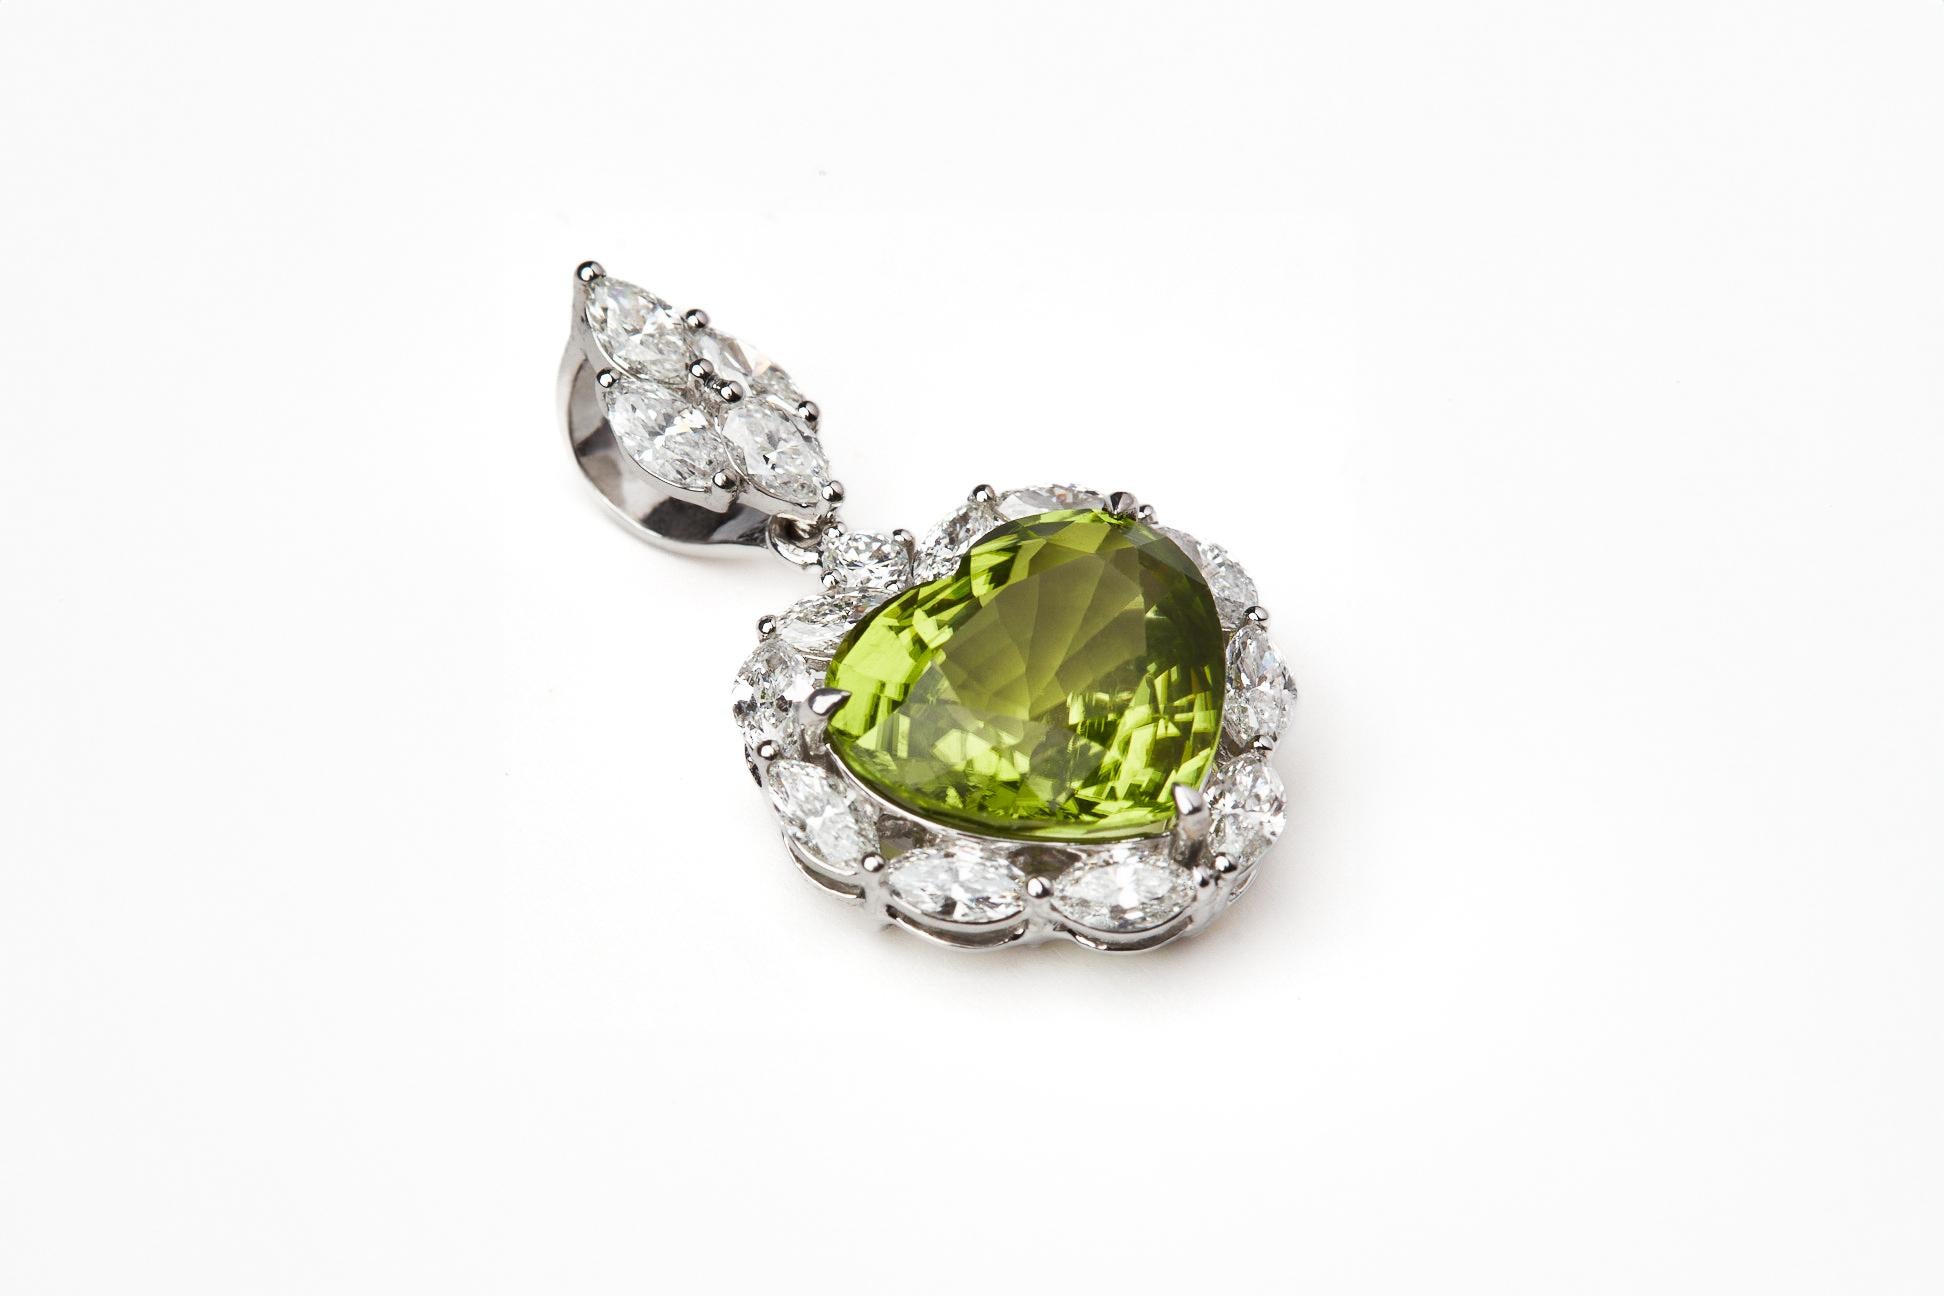 18K WHITE GOLD
1 ROUND DIAMONDS   0.07 CARATS
14 MARQUIS DIAMONDS   1.56 CARATS
1 BURMA PERIDOTS  6.21 CARATS 

Introducing our delightful Peridot Heart Pendant, a celebration of joy and vibrant energy. At the heart of this pendant lies a radiant